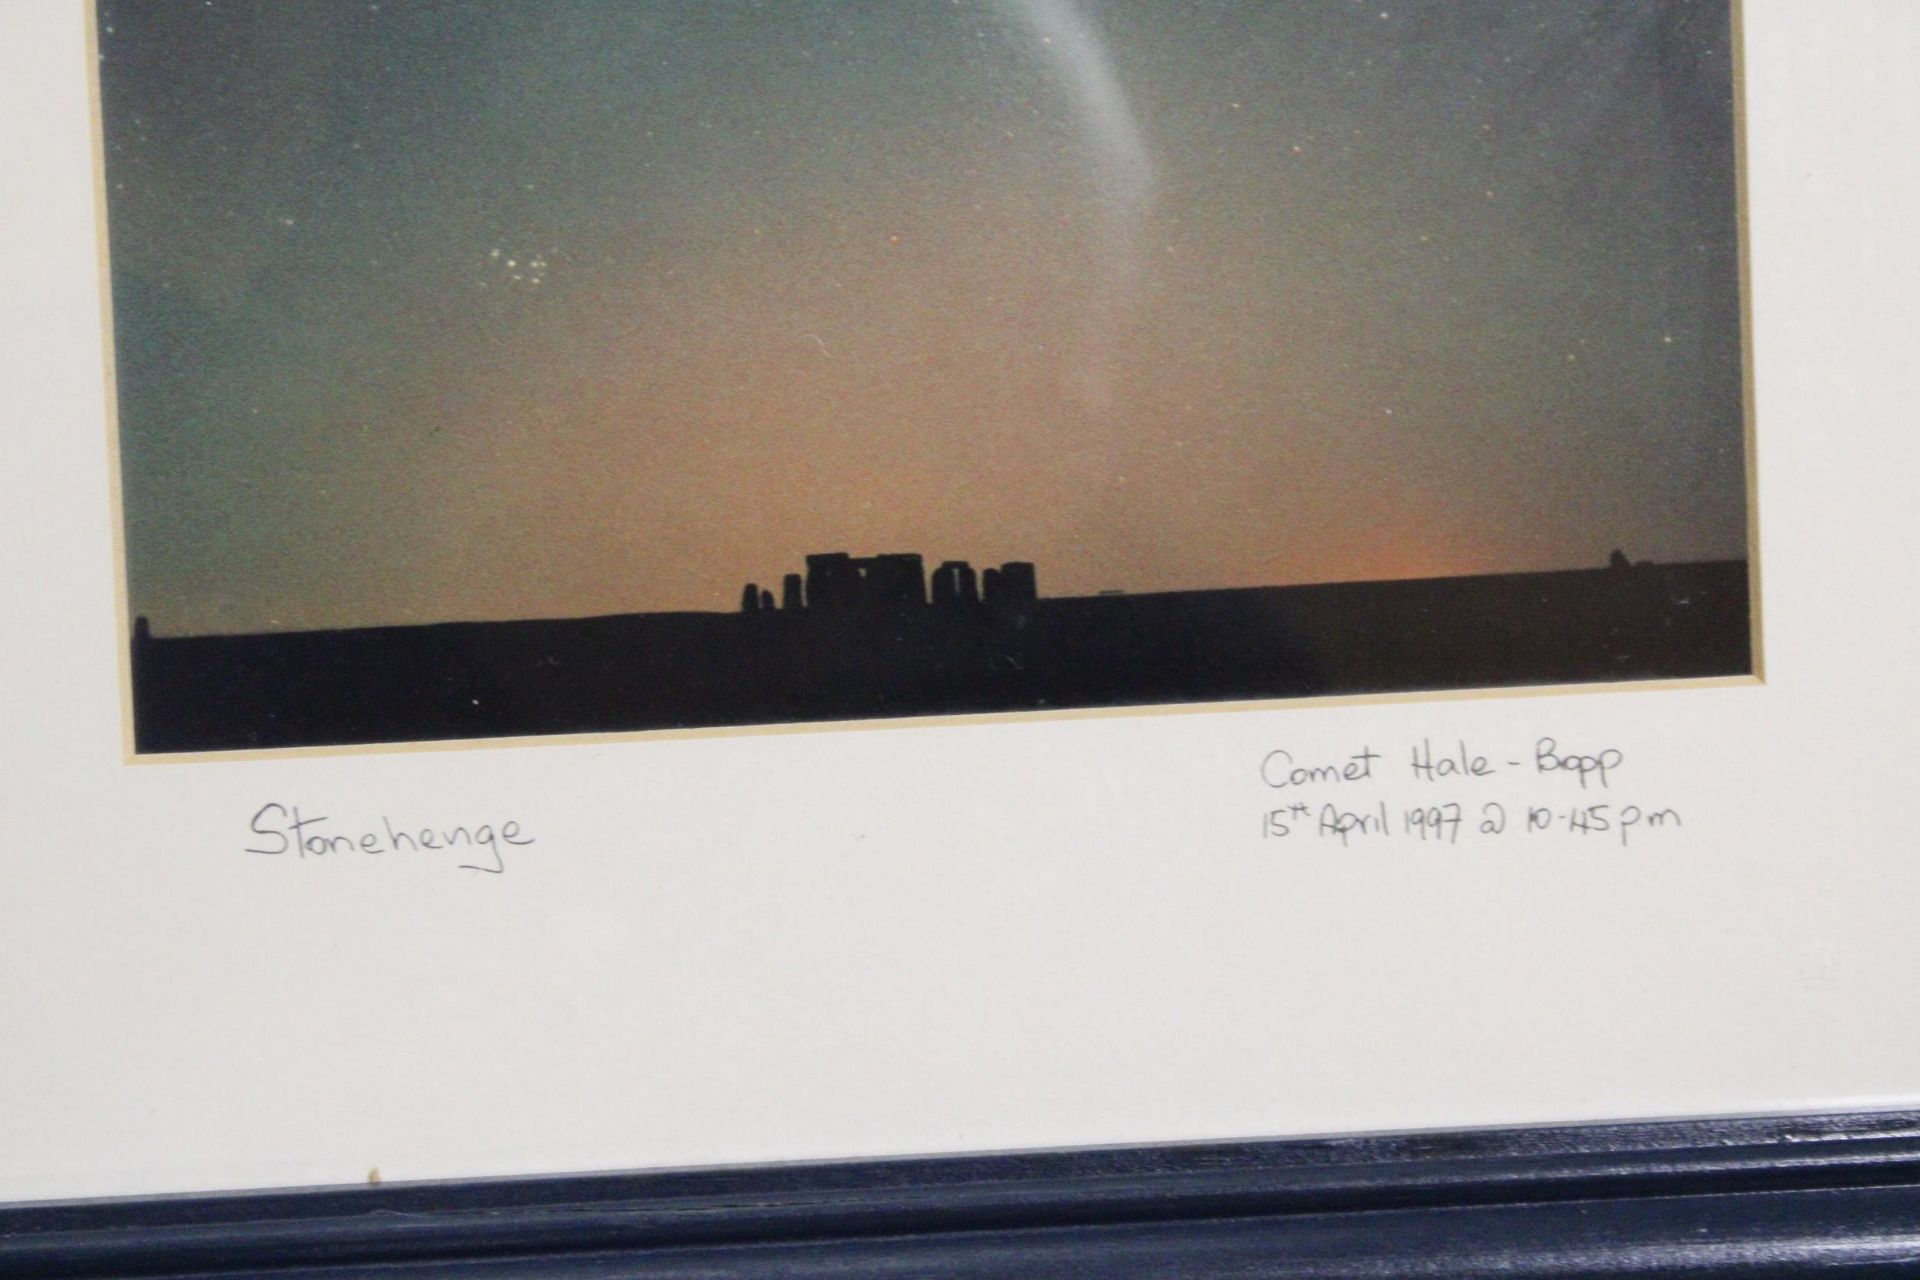 A FRAMED PICTURE OF COMET HALE-BOPP PASSING STONEHENGE ON 15TH APRIL 1997 AT 10.45 PM - Image 3 of 5